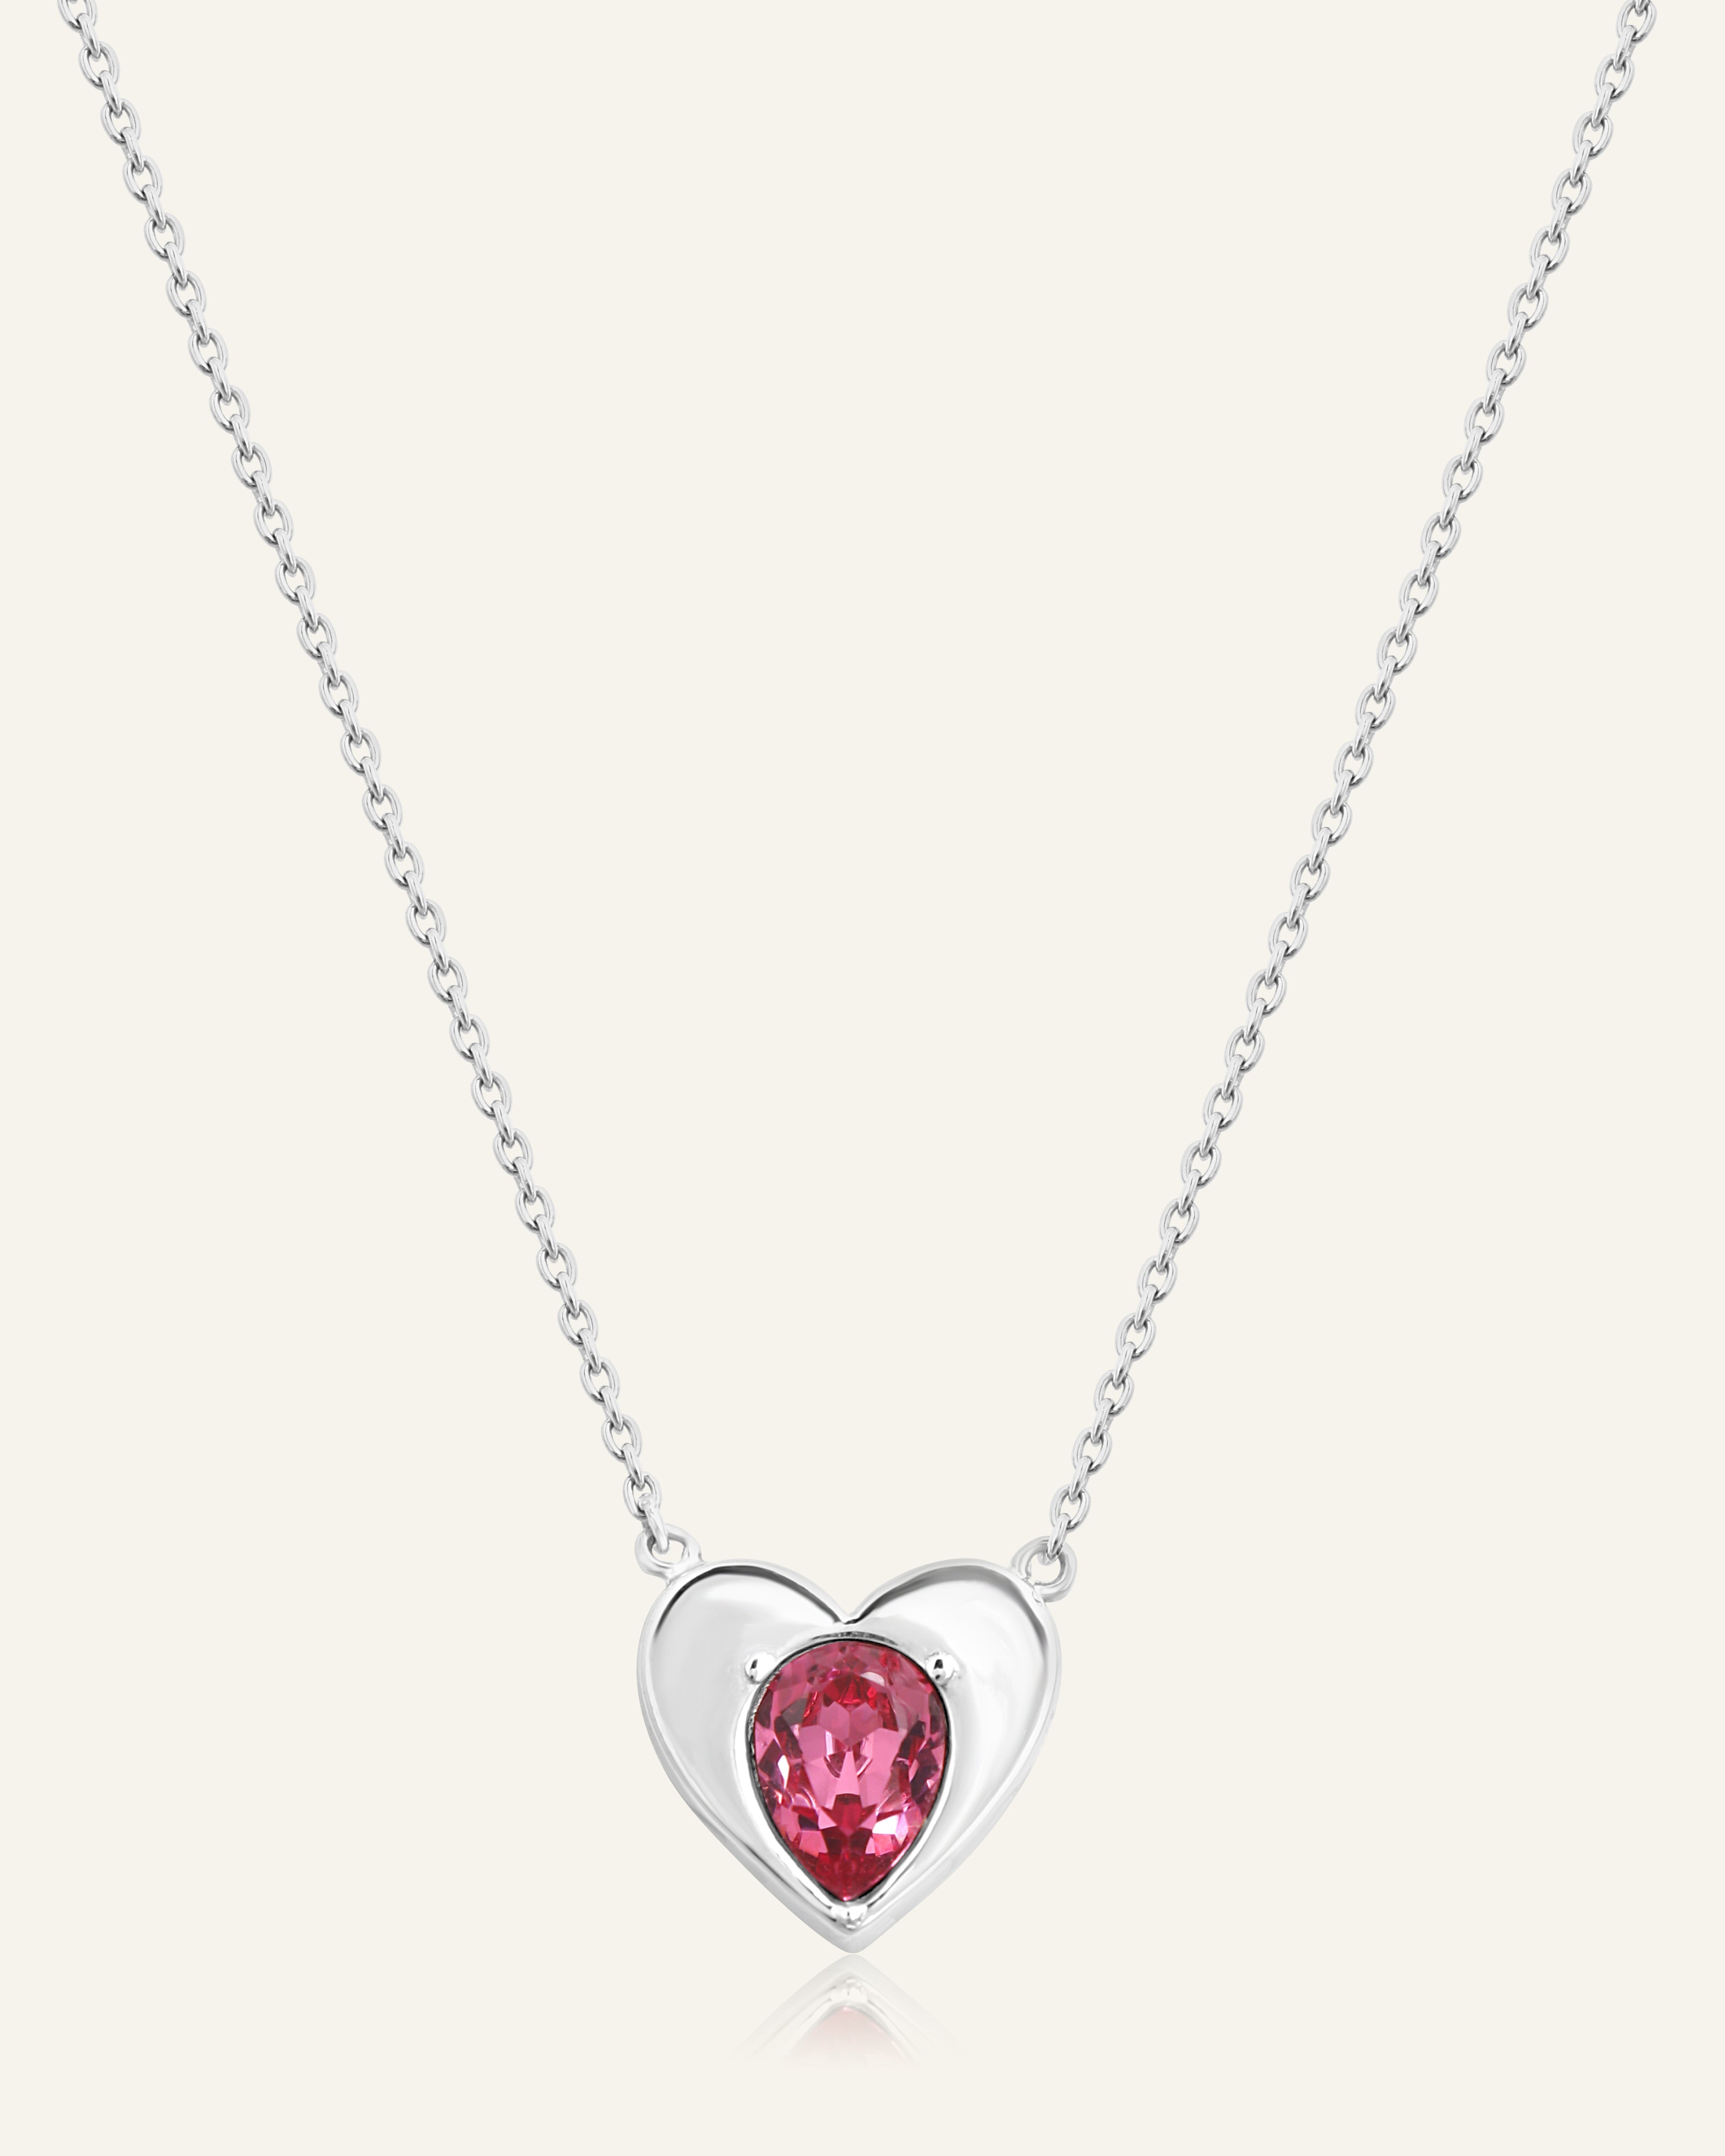 Pink Heart Necklace 925 Sterling Silver CZ Crystal DEPHINI